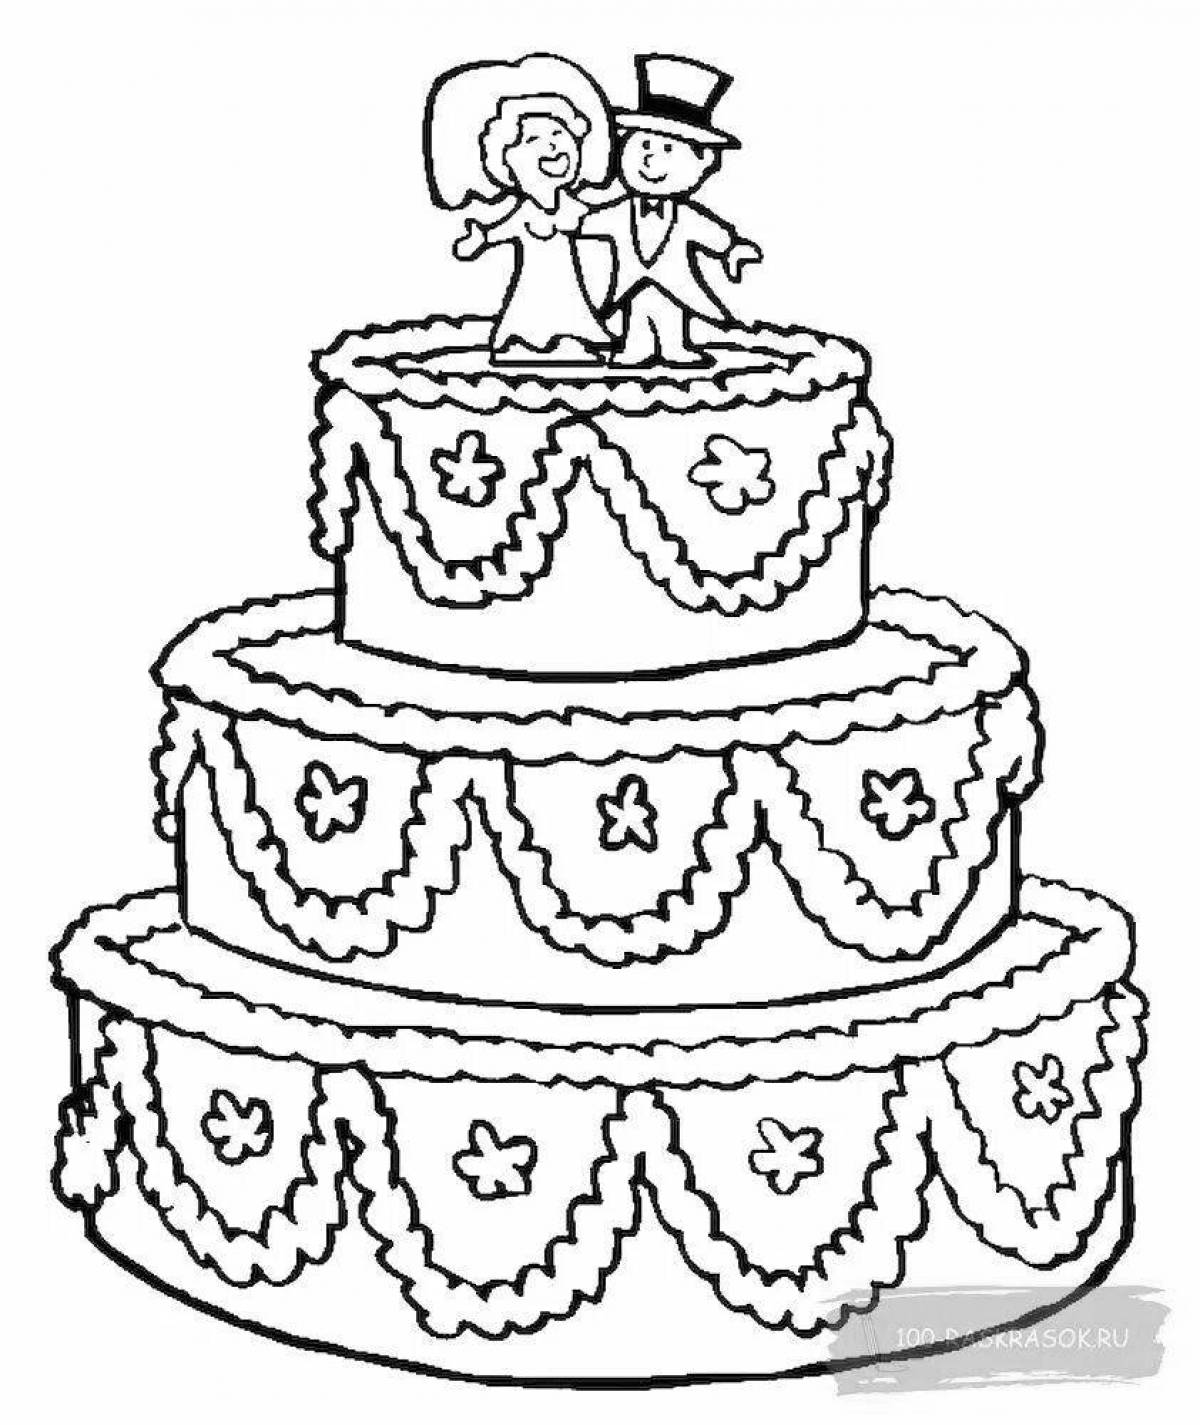 Coloring book shining cake for kids